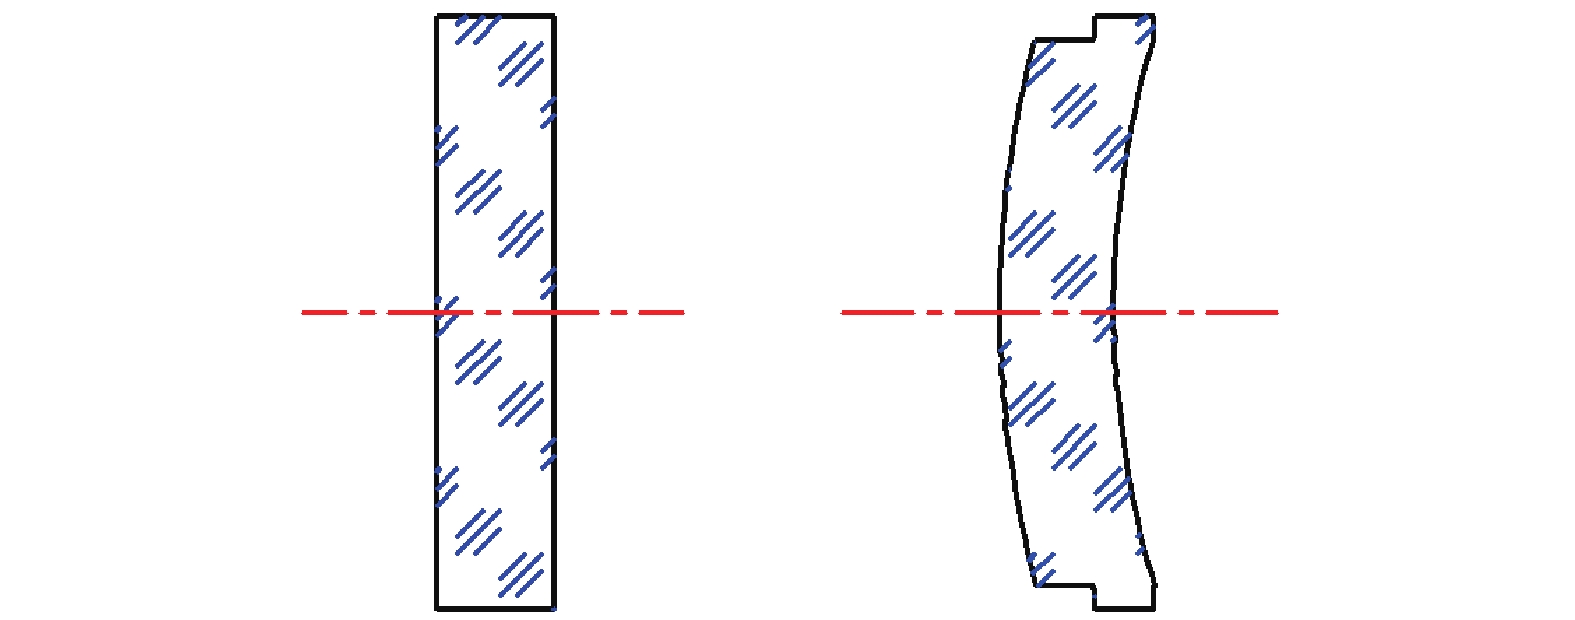 Schematics of two typical kind of underwater optical window structures